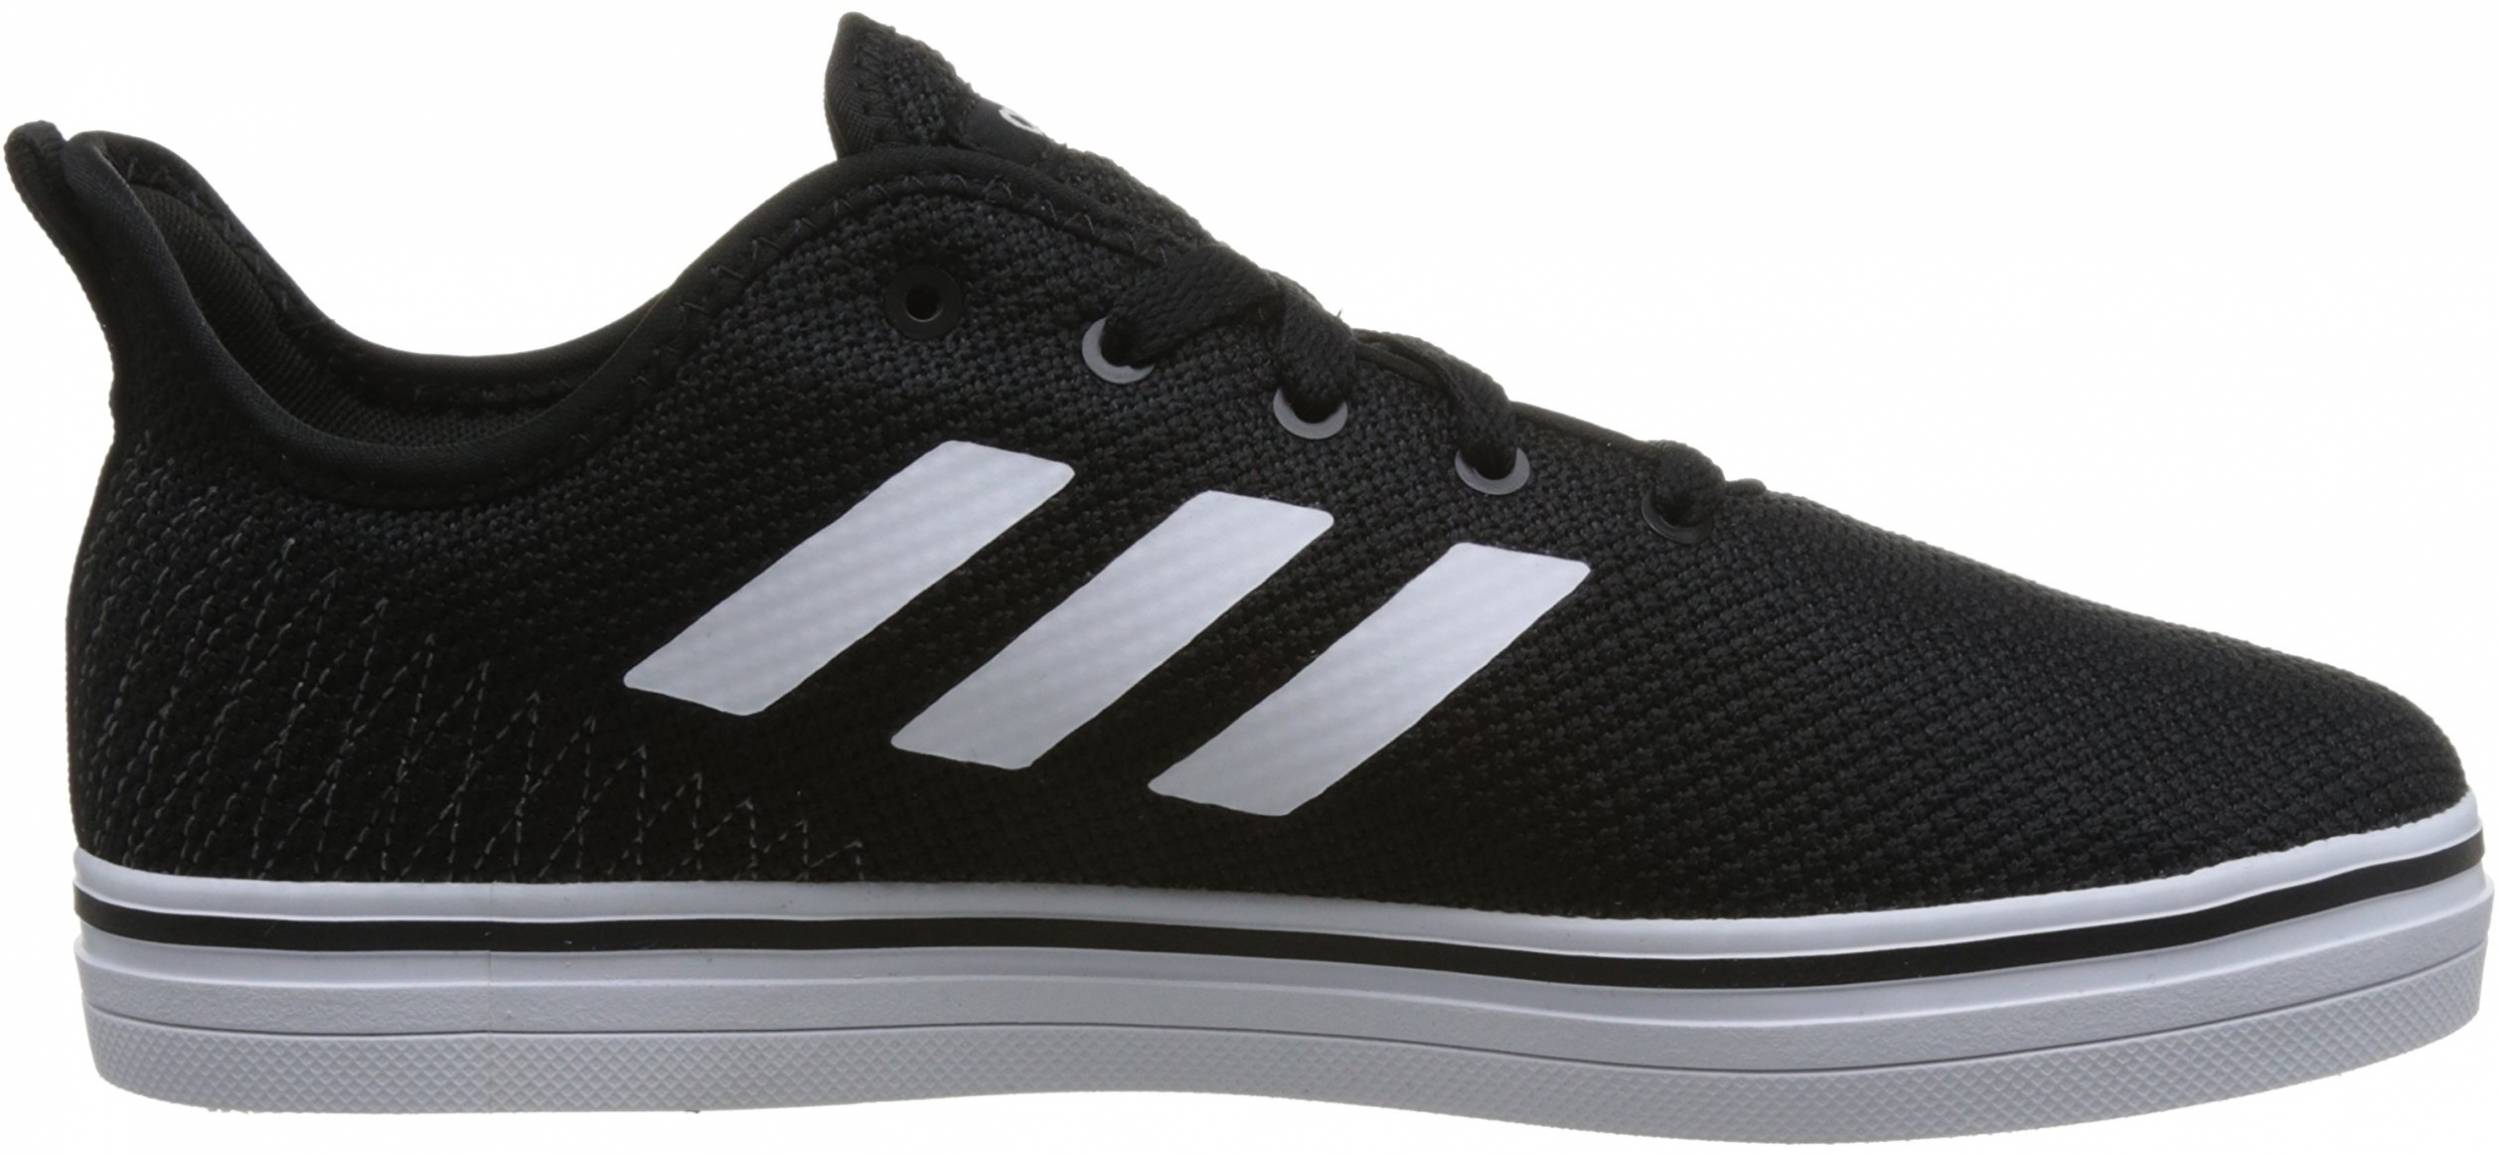 Adidas True Chill sneakers in black 